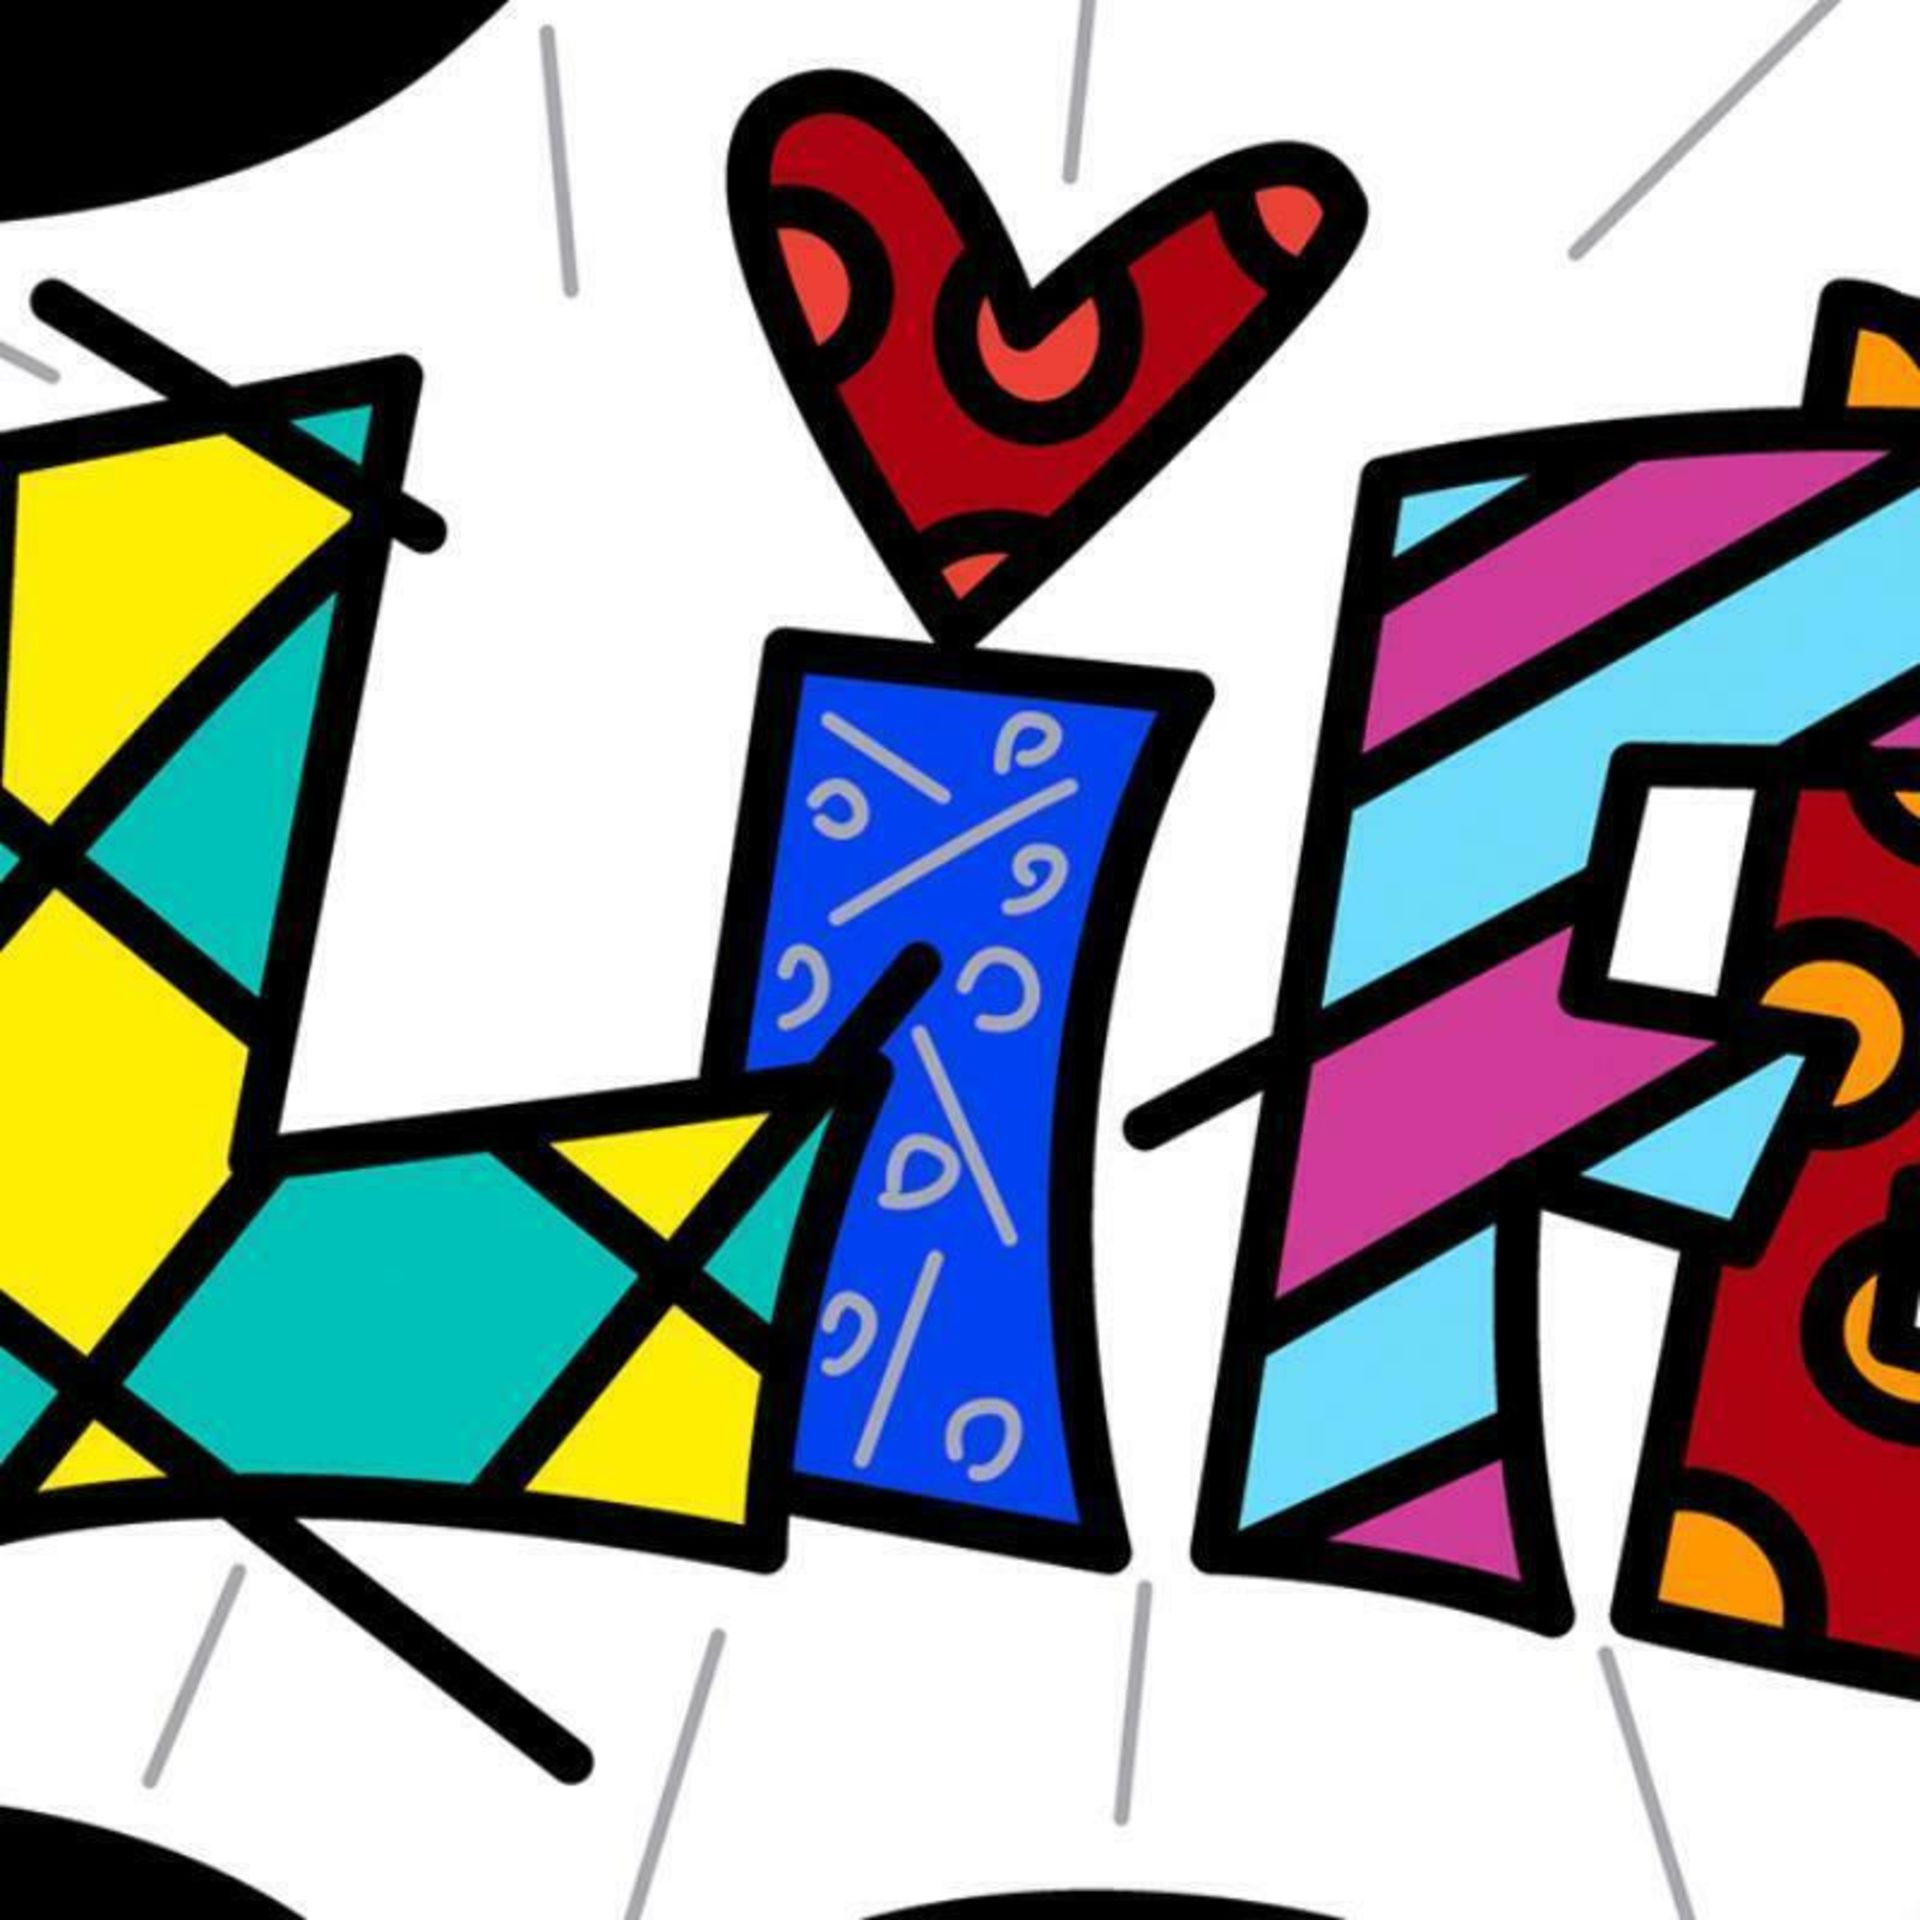 Romero Britto "Life Black Mini Word" Hand Signed Giclee on Canvas; Authenticated - Image 2 of 2